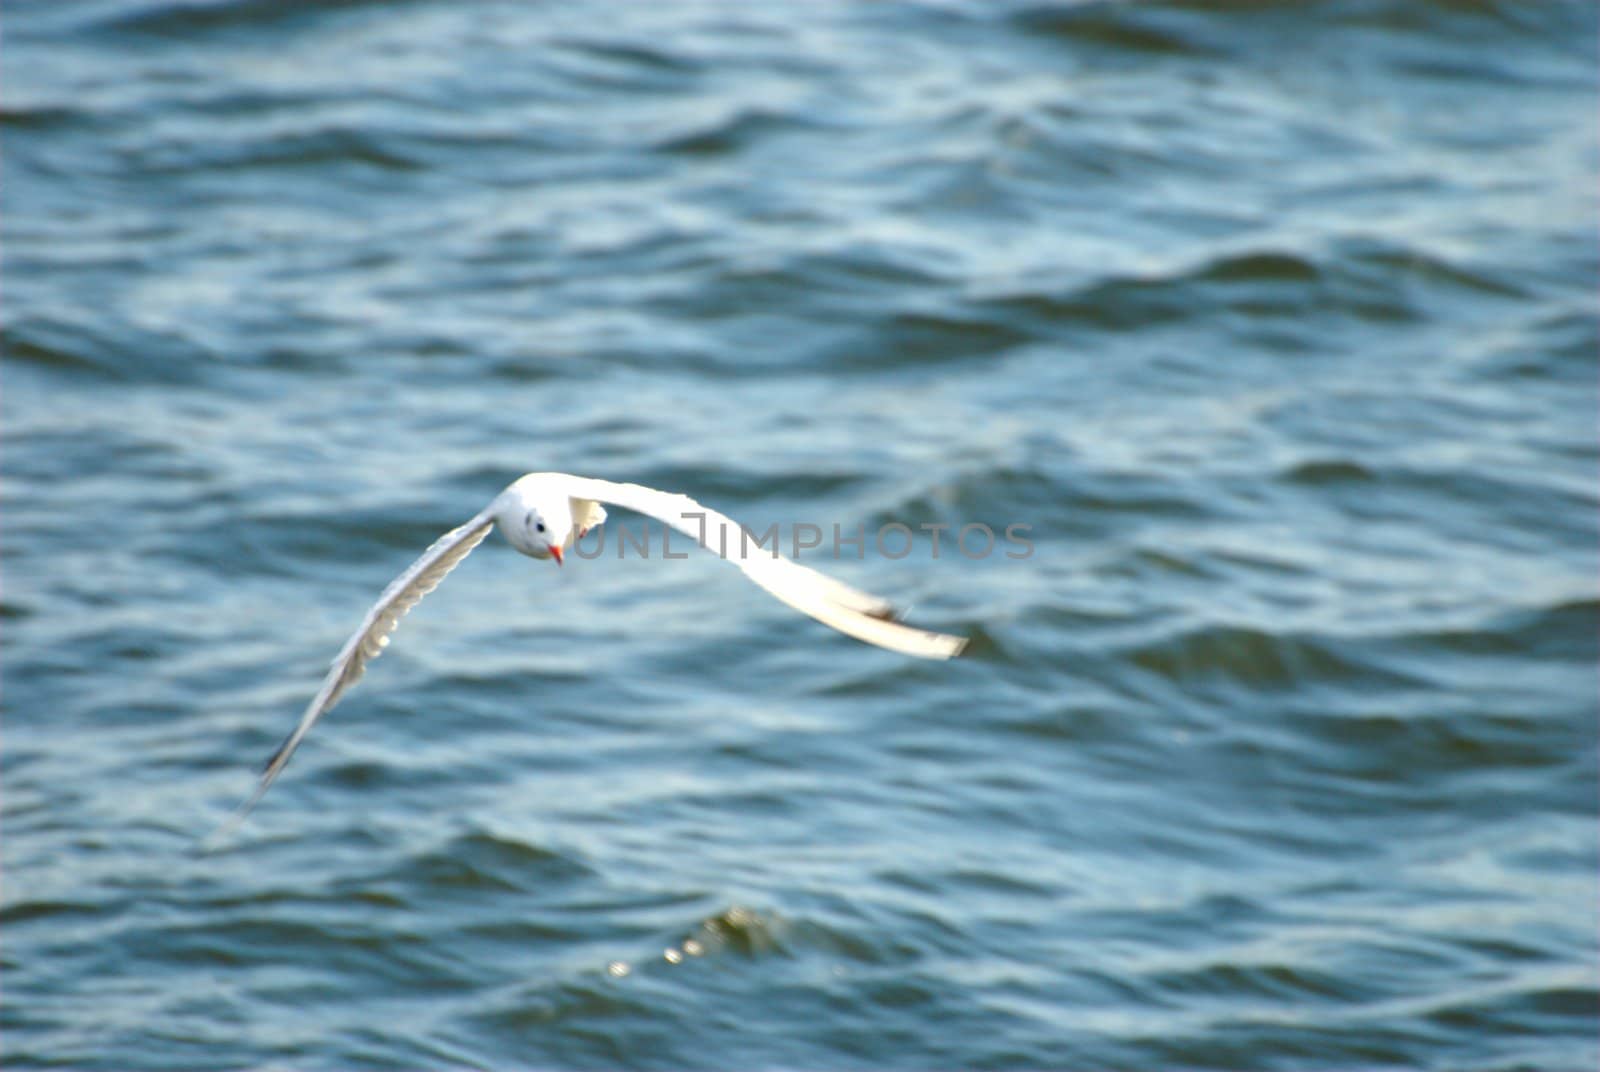 Seagull flies over river.